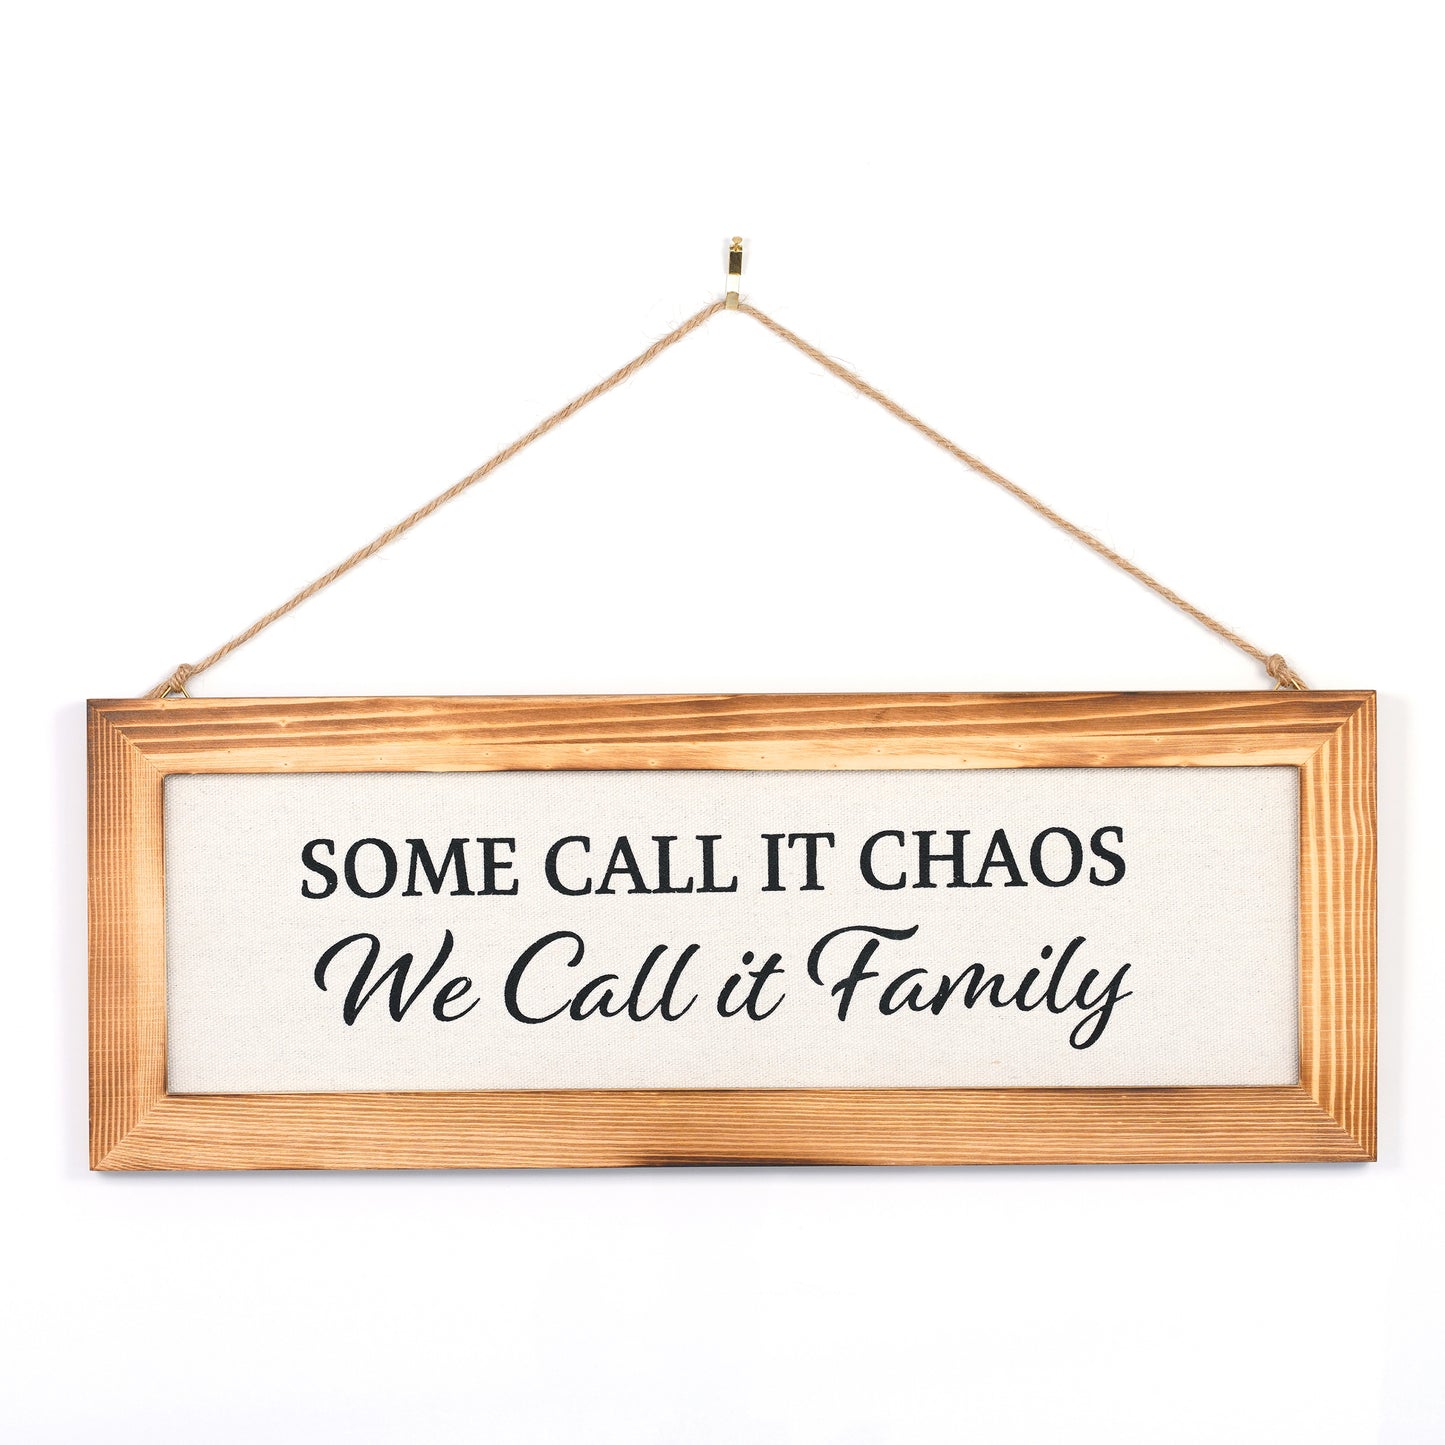 Some Call it Chaos, We Call it Family - 16" x 6" Canvas Sign